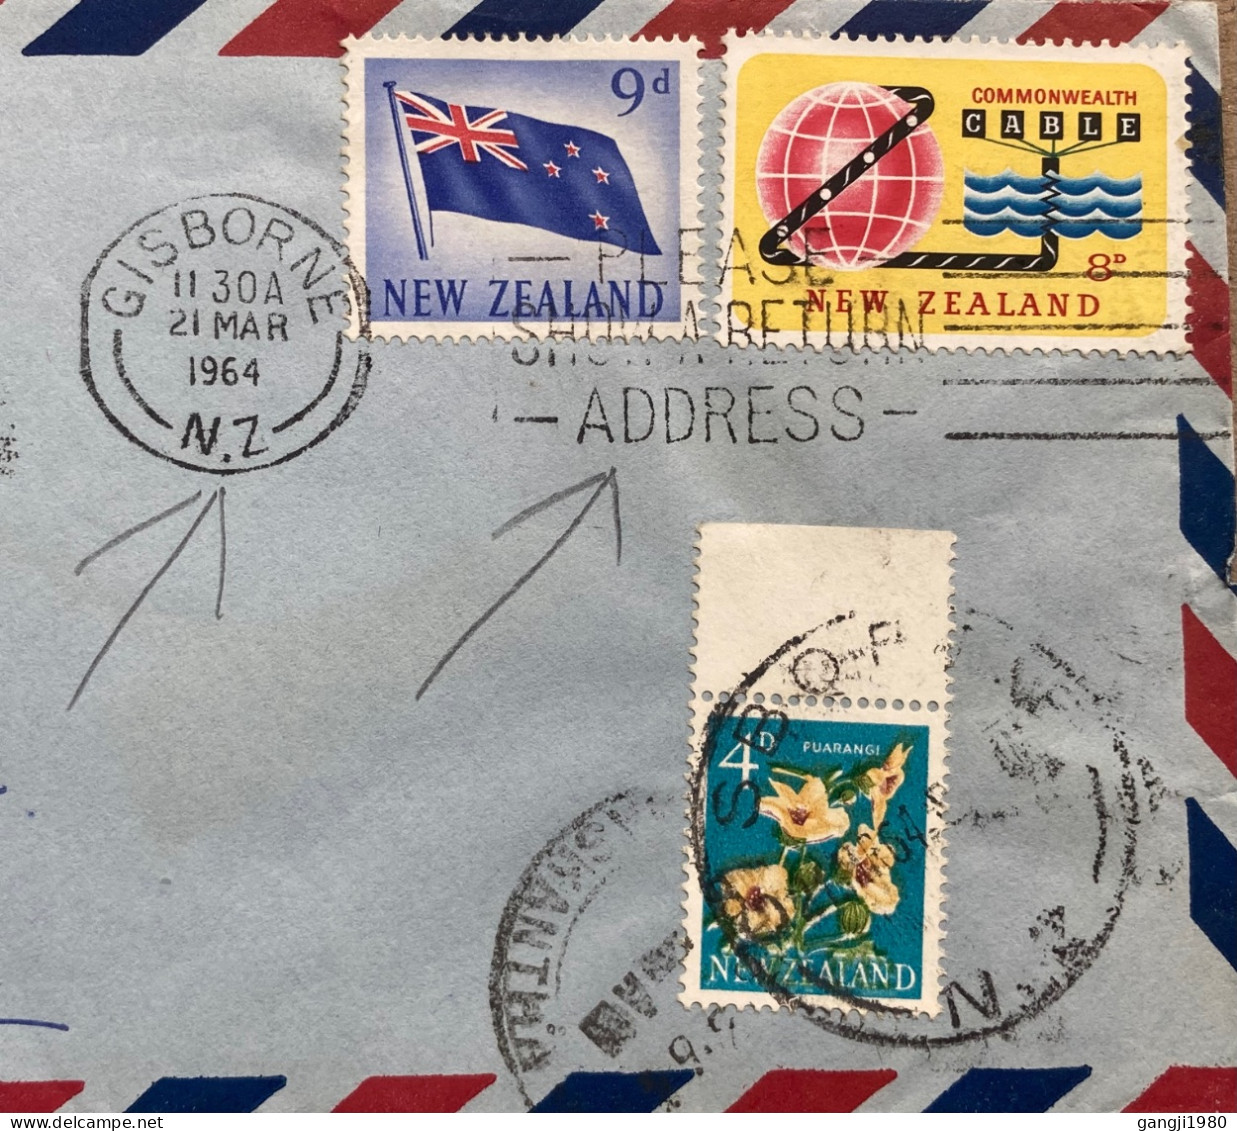 NEW-ZEALAND 1964, COVER USED TO INDIA, 3 DIFF STAMP, FLAG, CABLE, FLOWER, GISBORNE CITY SLOGAN, PLEASE SHOW RETURN ADDRE - Lettres & Documents